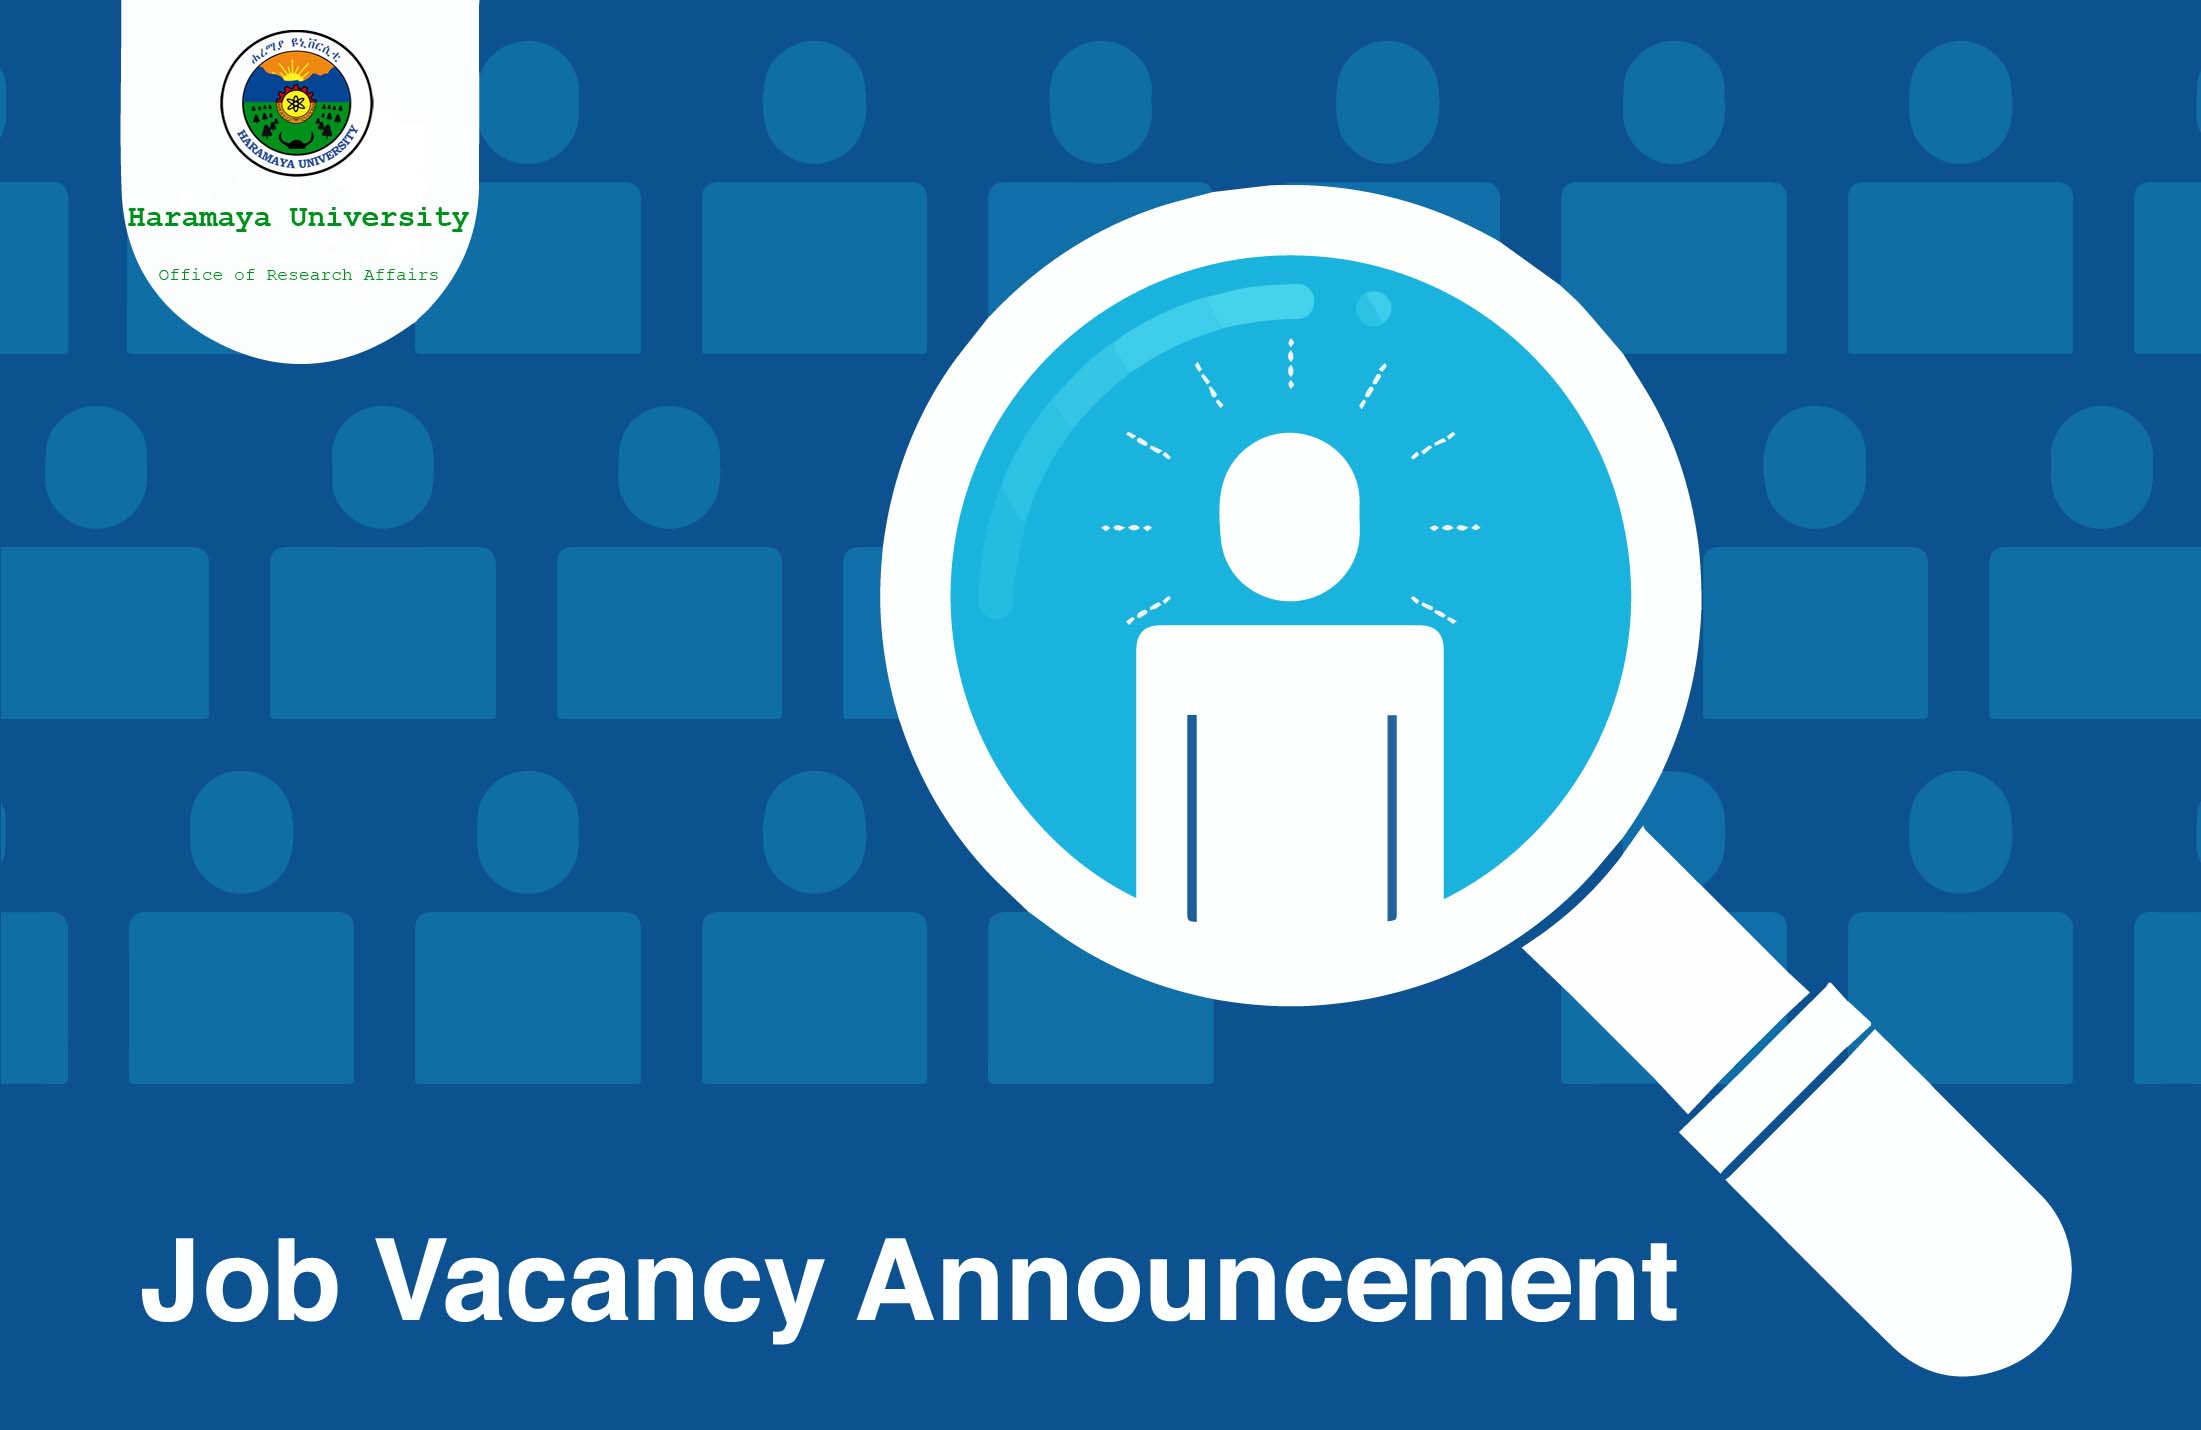 Announcement for a Vacant Position